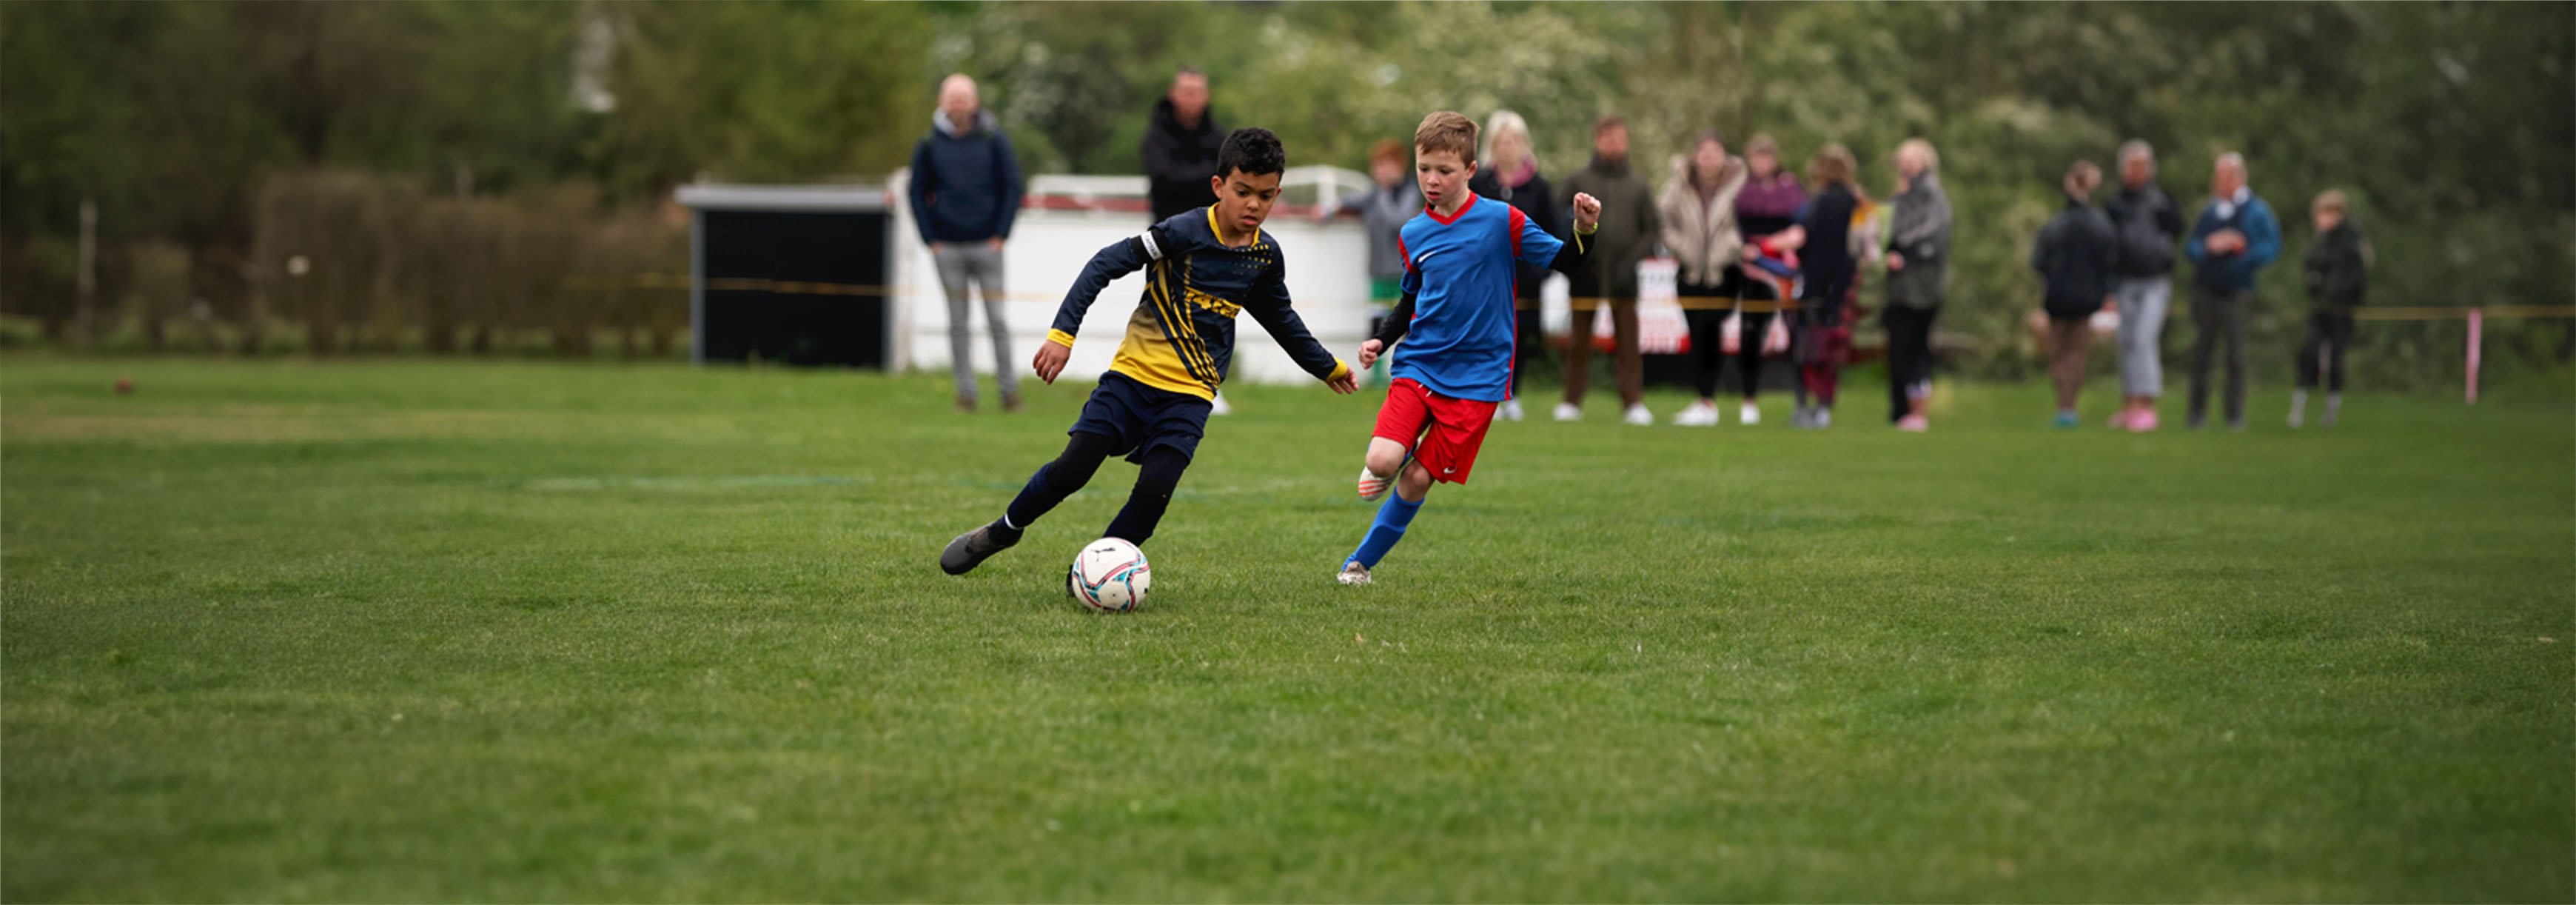 A young player runs with the ball during a match, while his opponent is tracking back.